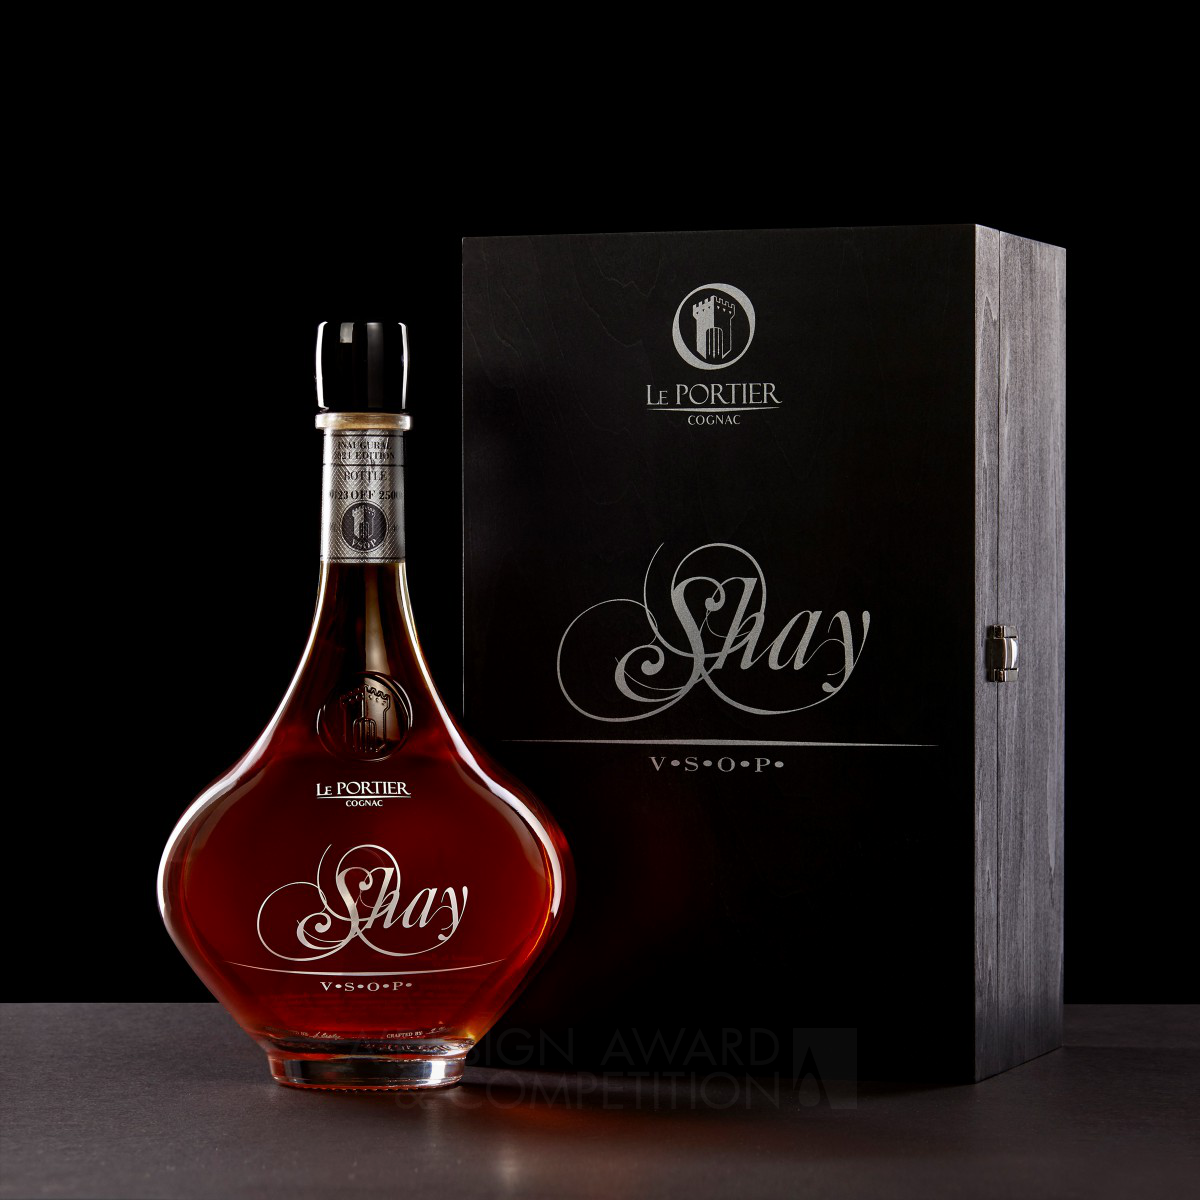 Tiago Russo wins Silver at the prestigious A' Packaging Design Award with Shay Vsop Luxury Cognac.